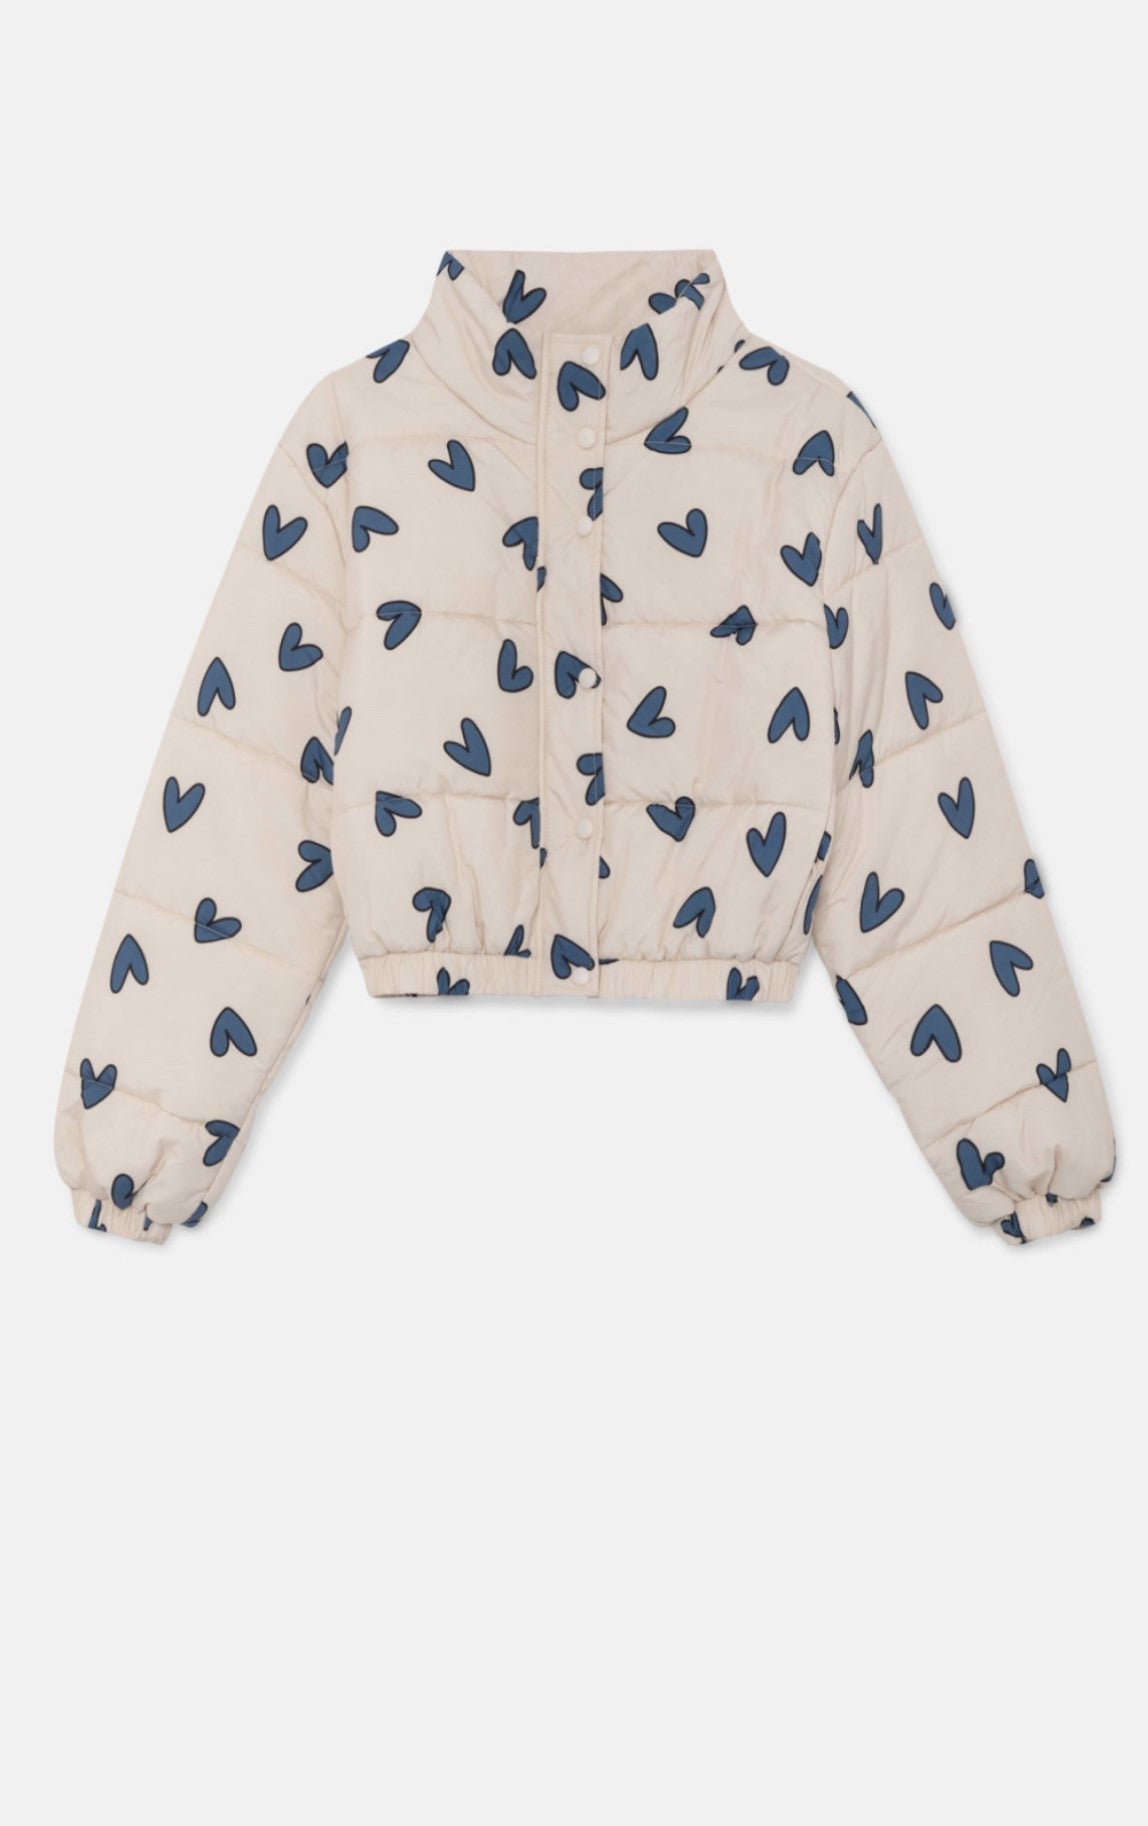 Creme Coat with Blue Hearts